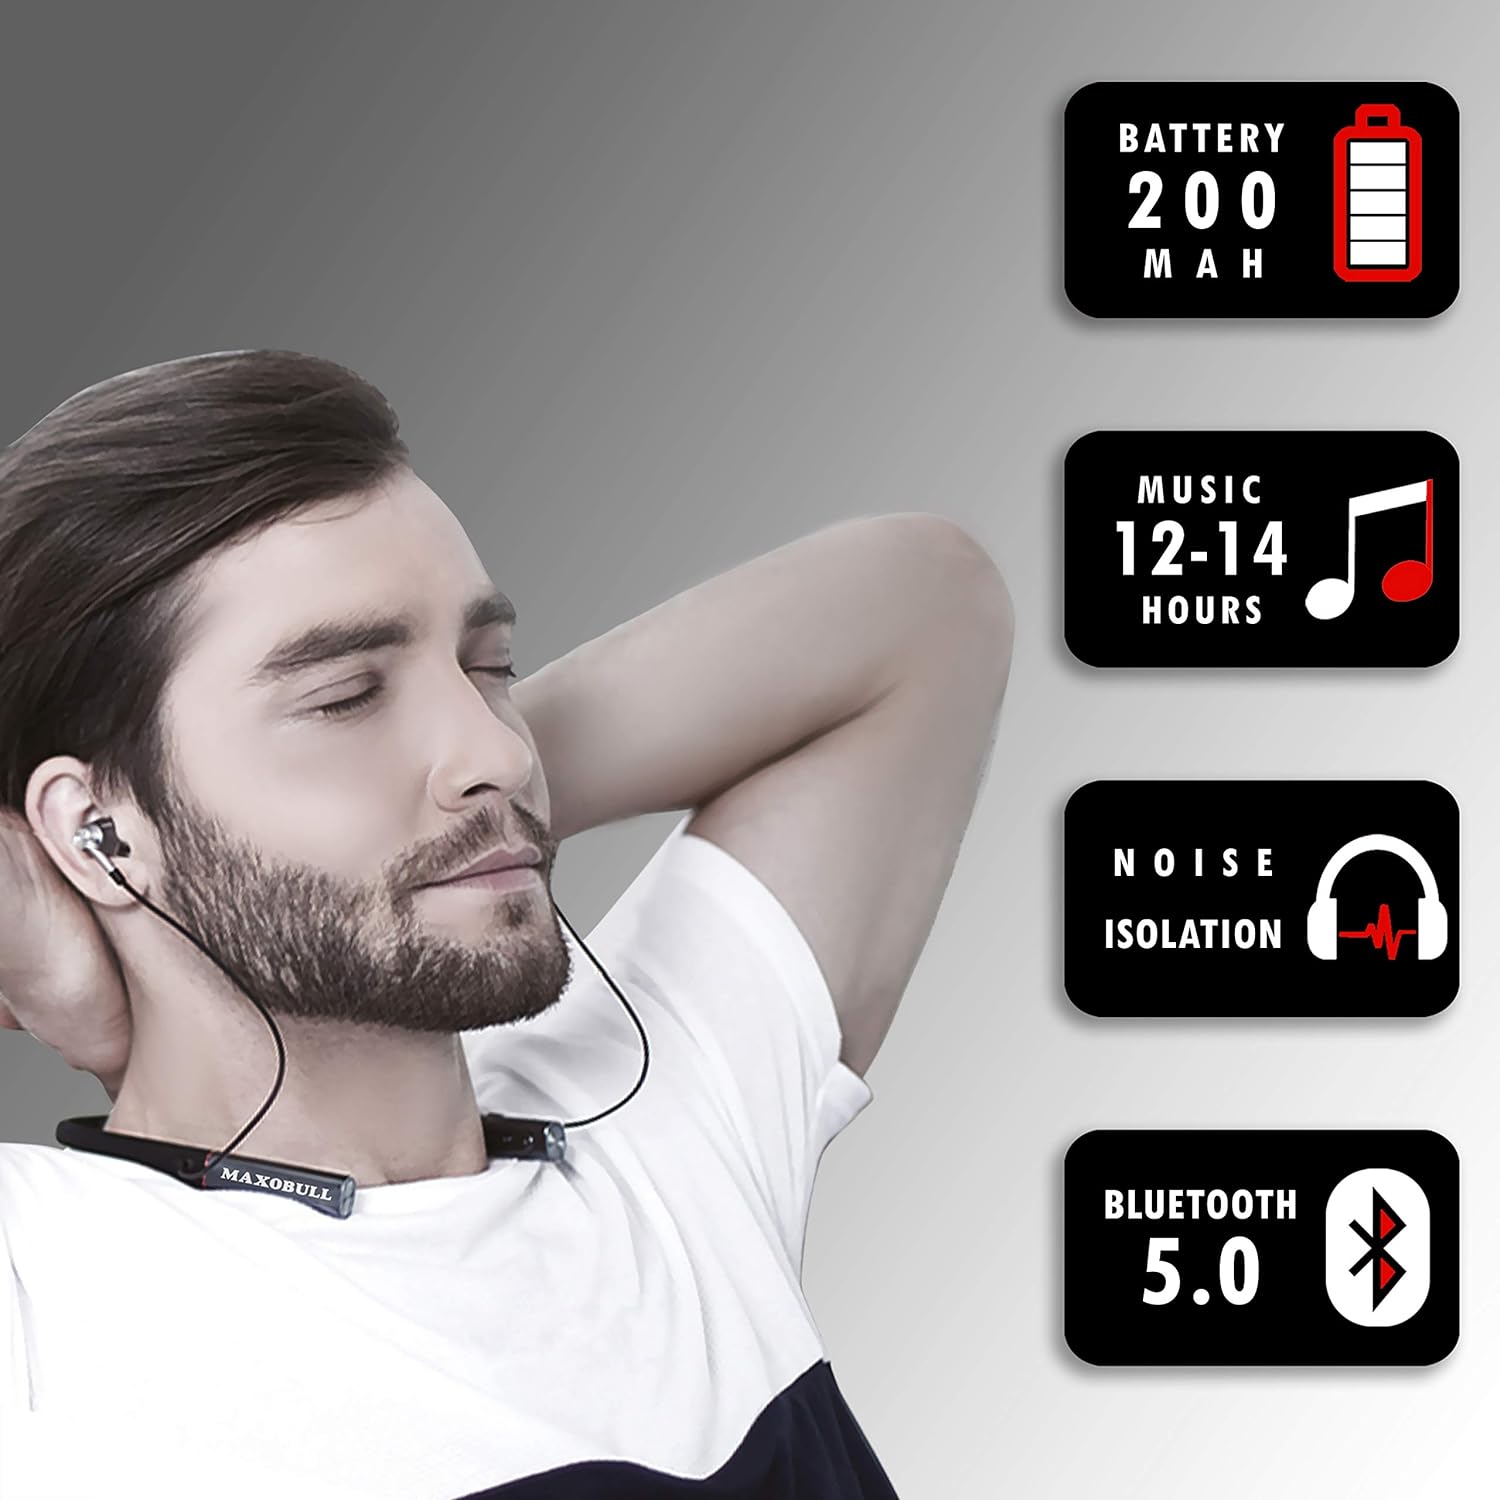 Maxobull PAM-24 Smart Bluetooth Neckband: Powerful Audio, Google Assistance, Water and Dust Resistant, Tangle-Free Design, with Mic (Black)